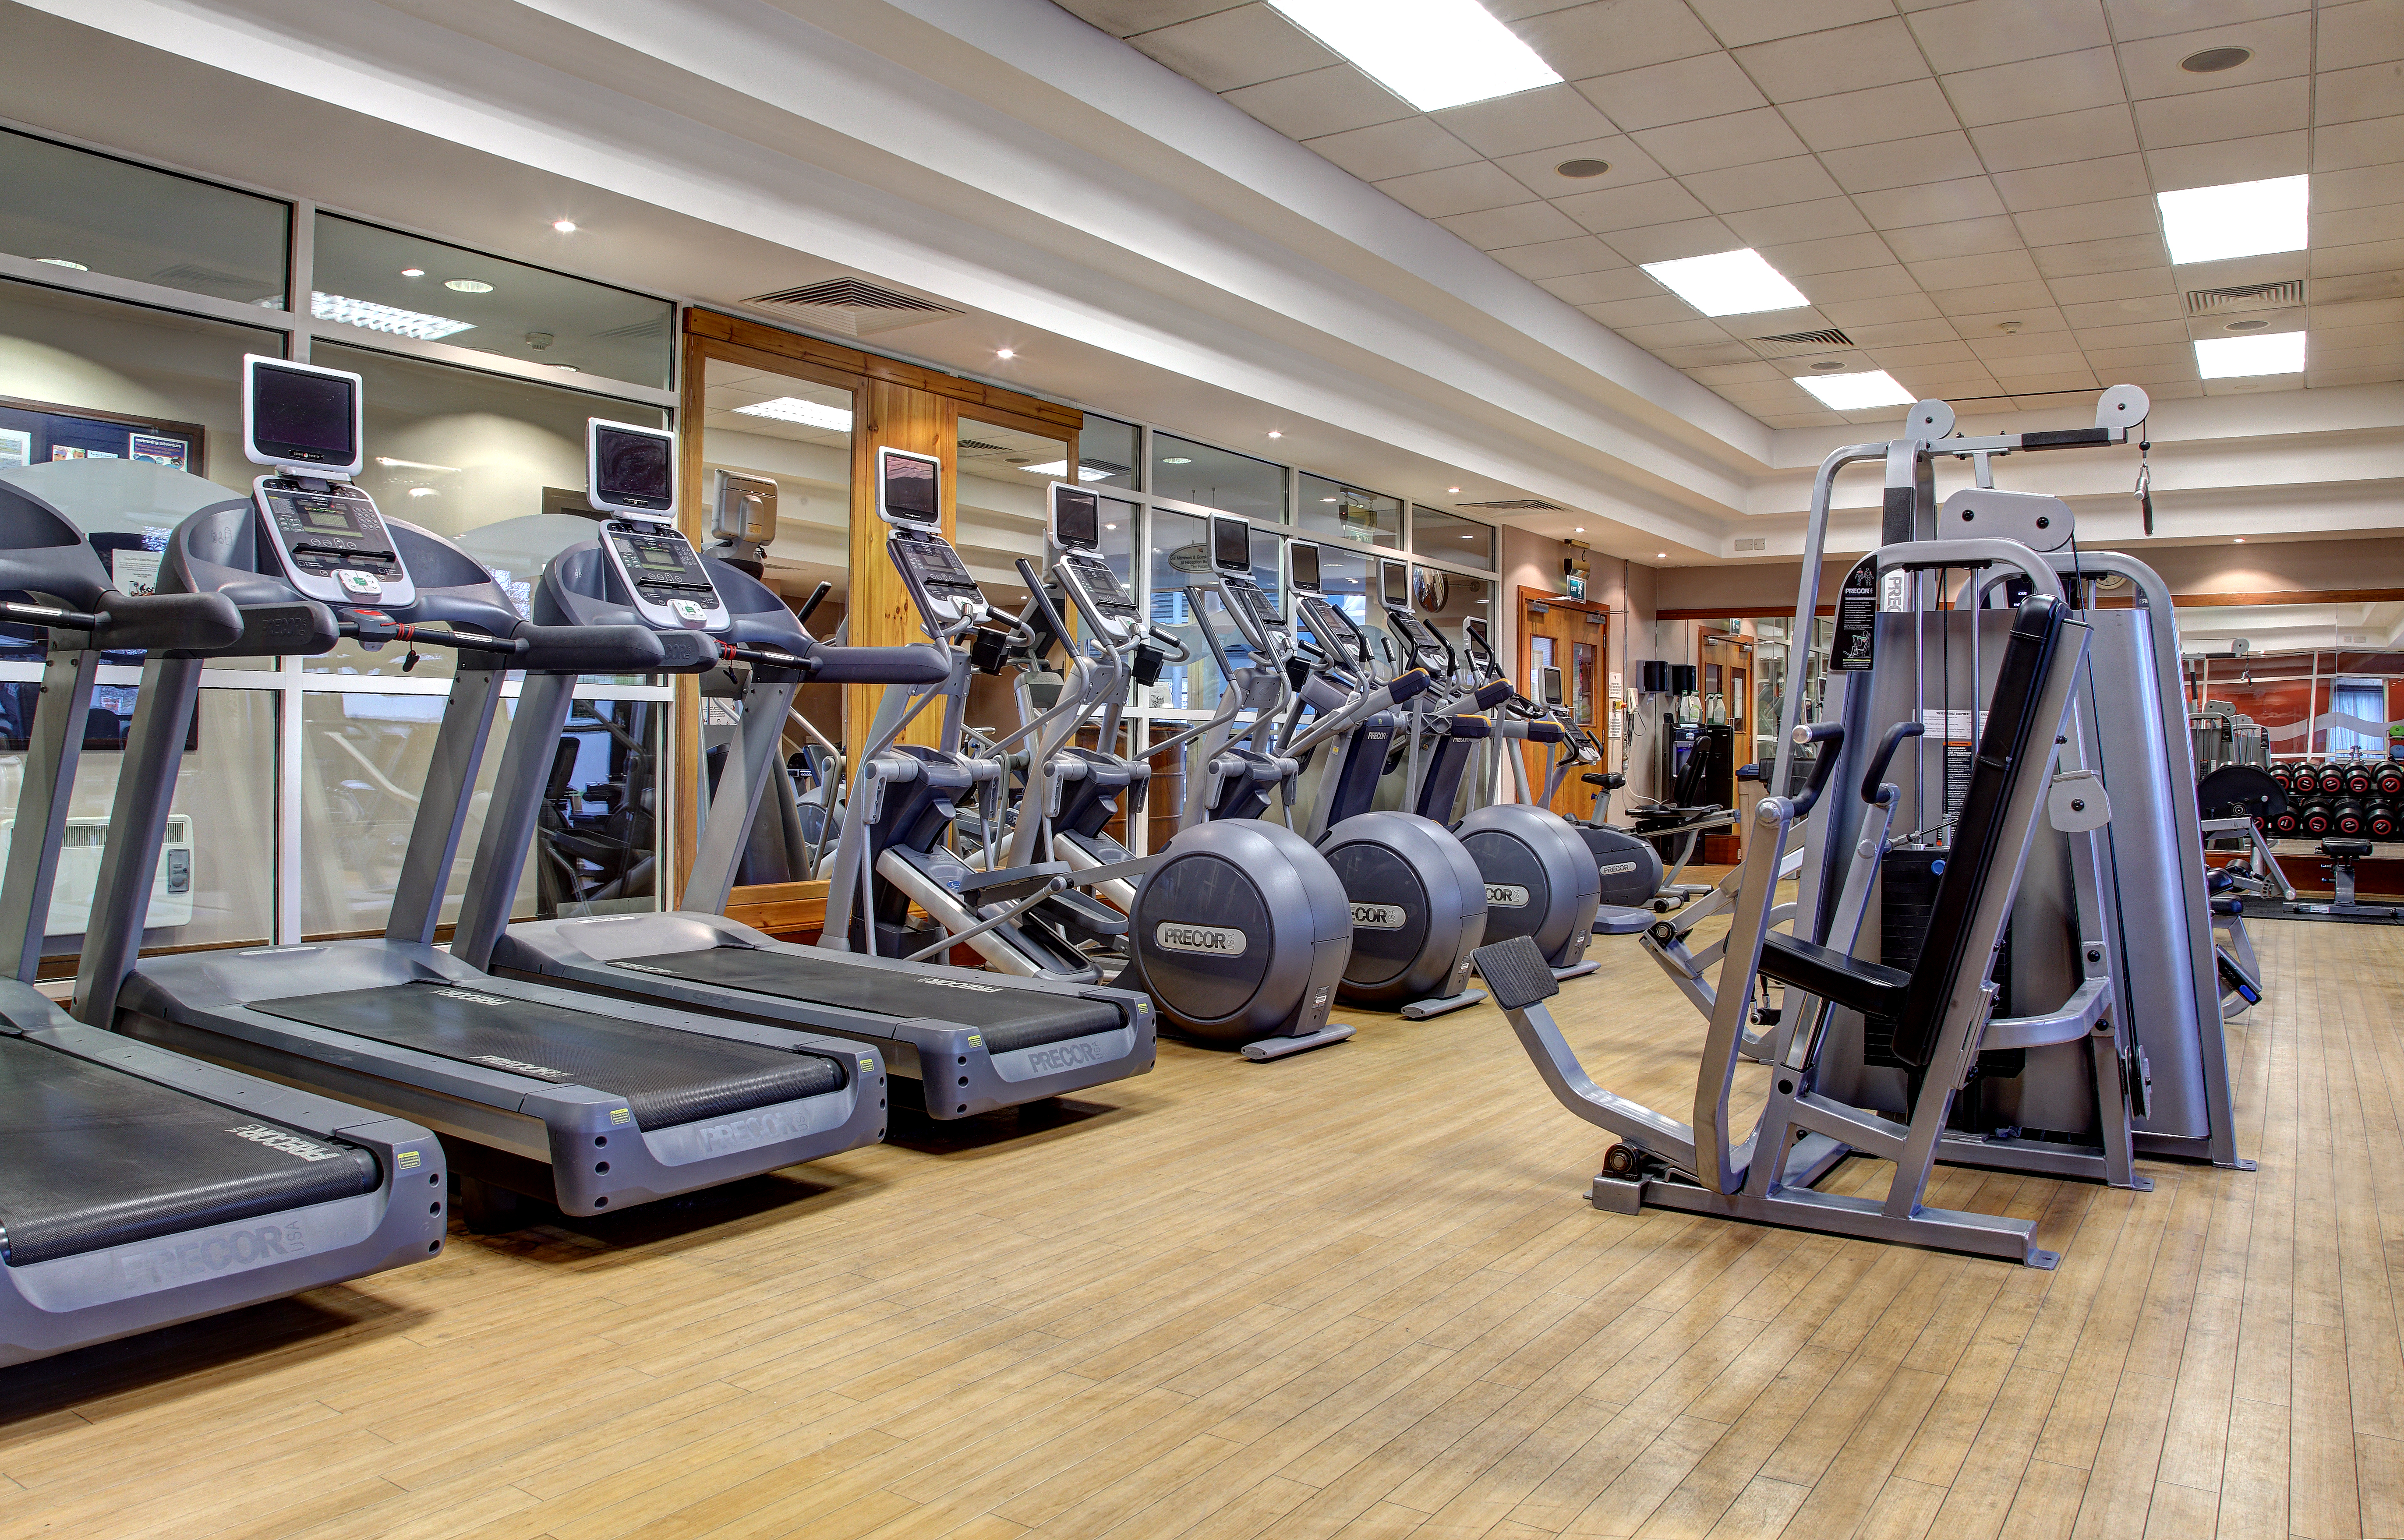 Fitness Center With Cardio Equipment, Weight Machines, Free Weights and Mirrored Walls